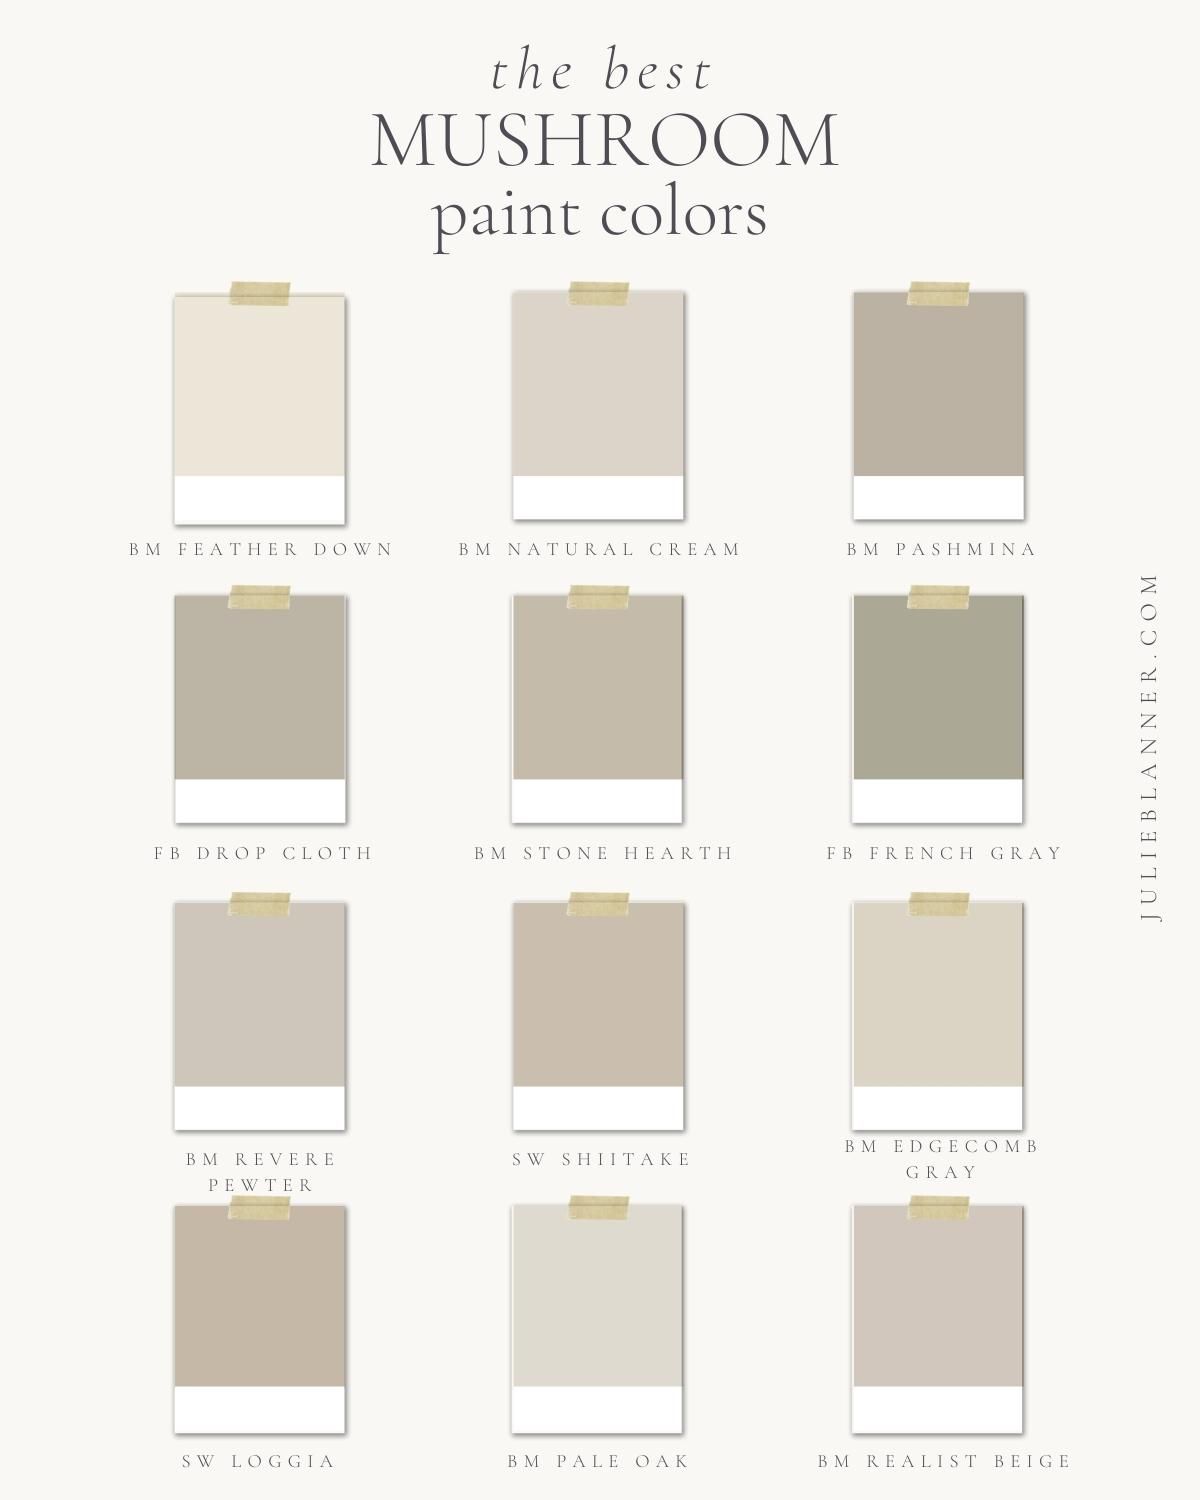 A graphic with 12 shades of mushroom paint colors